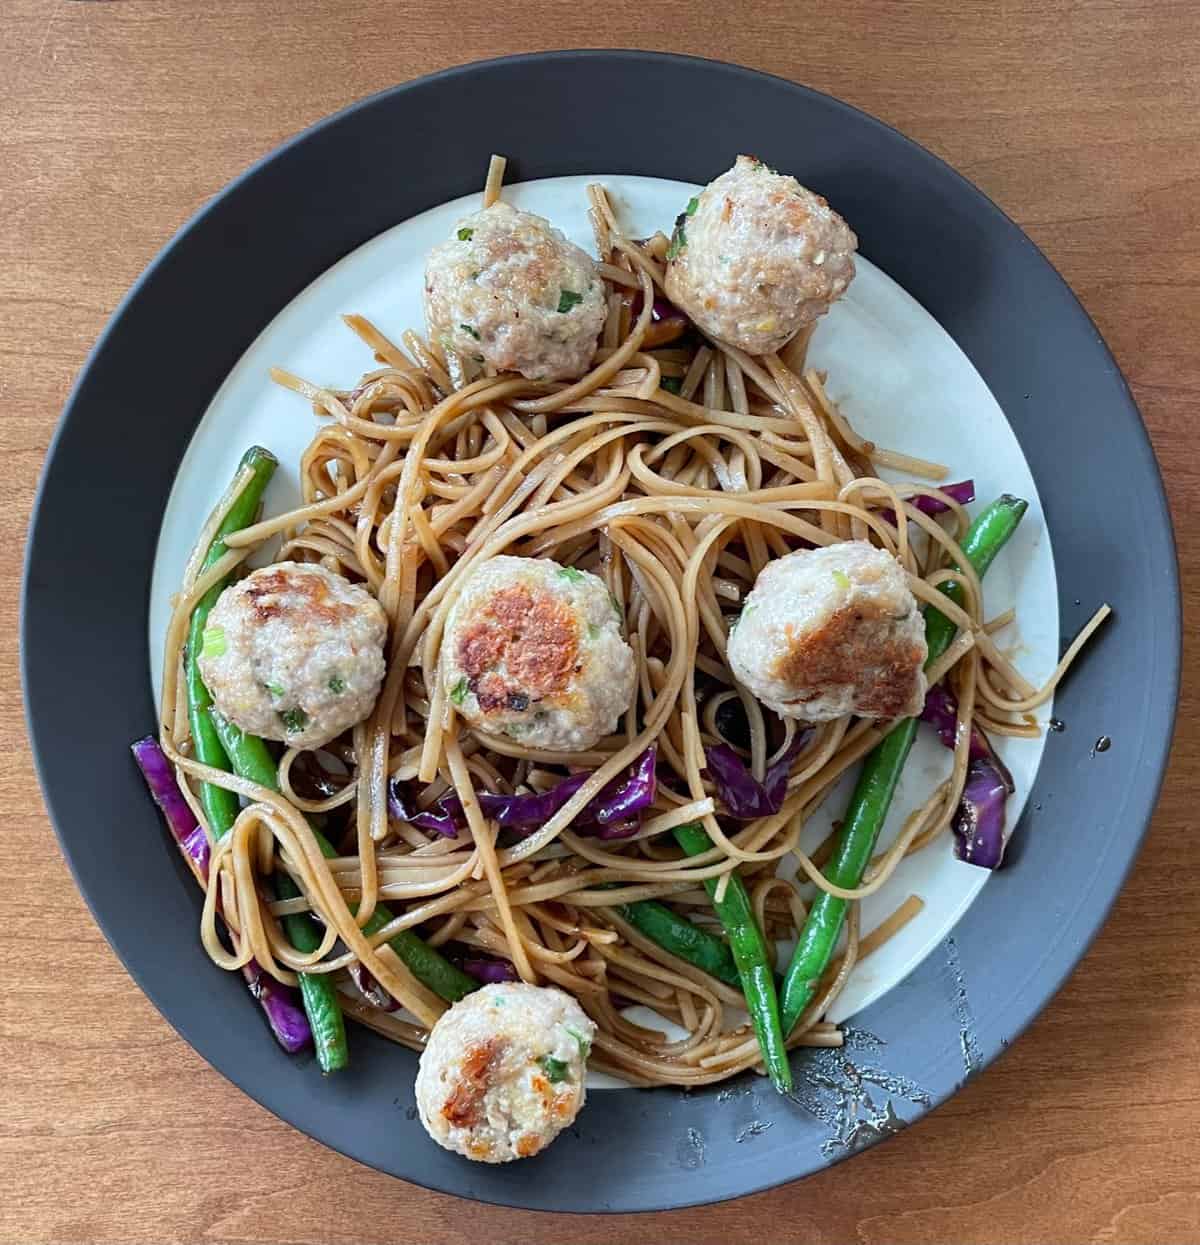 Shrimp and pork meatballs on a plate of noodles, green beans, and cabbage.